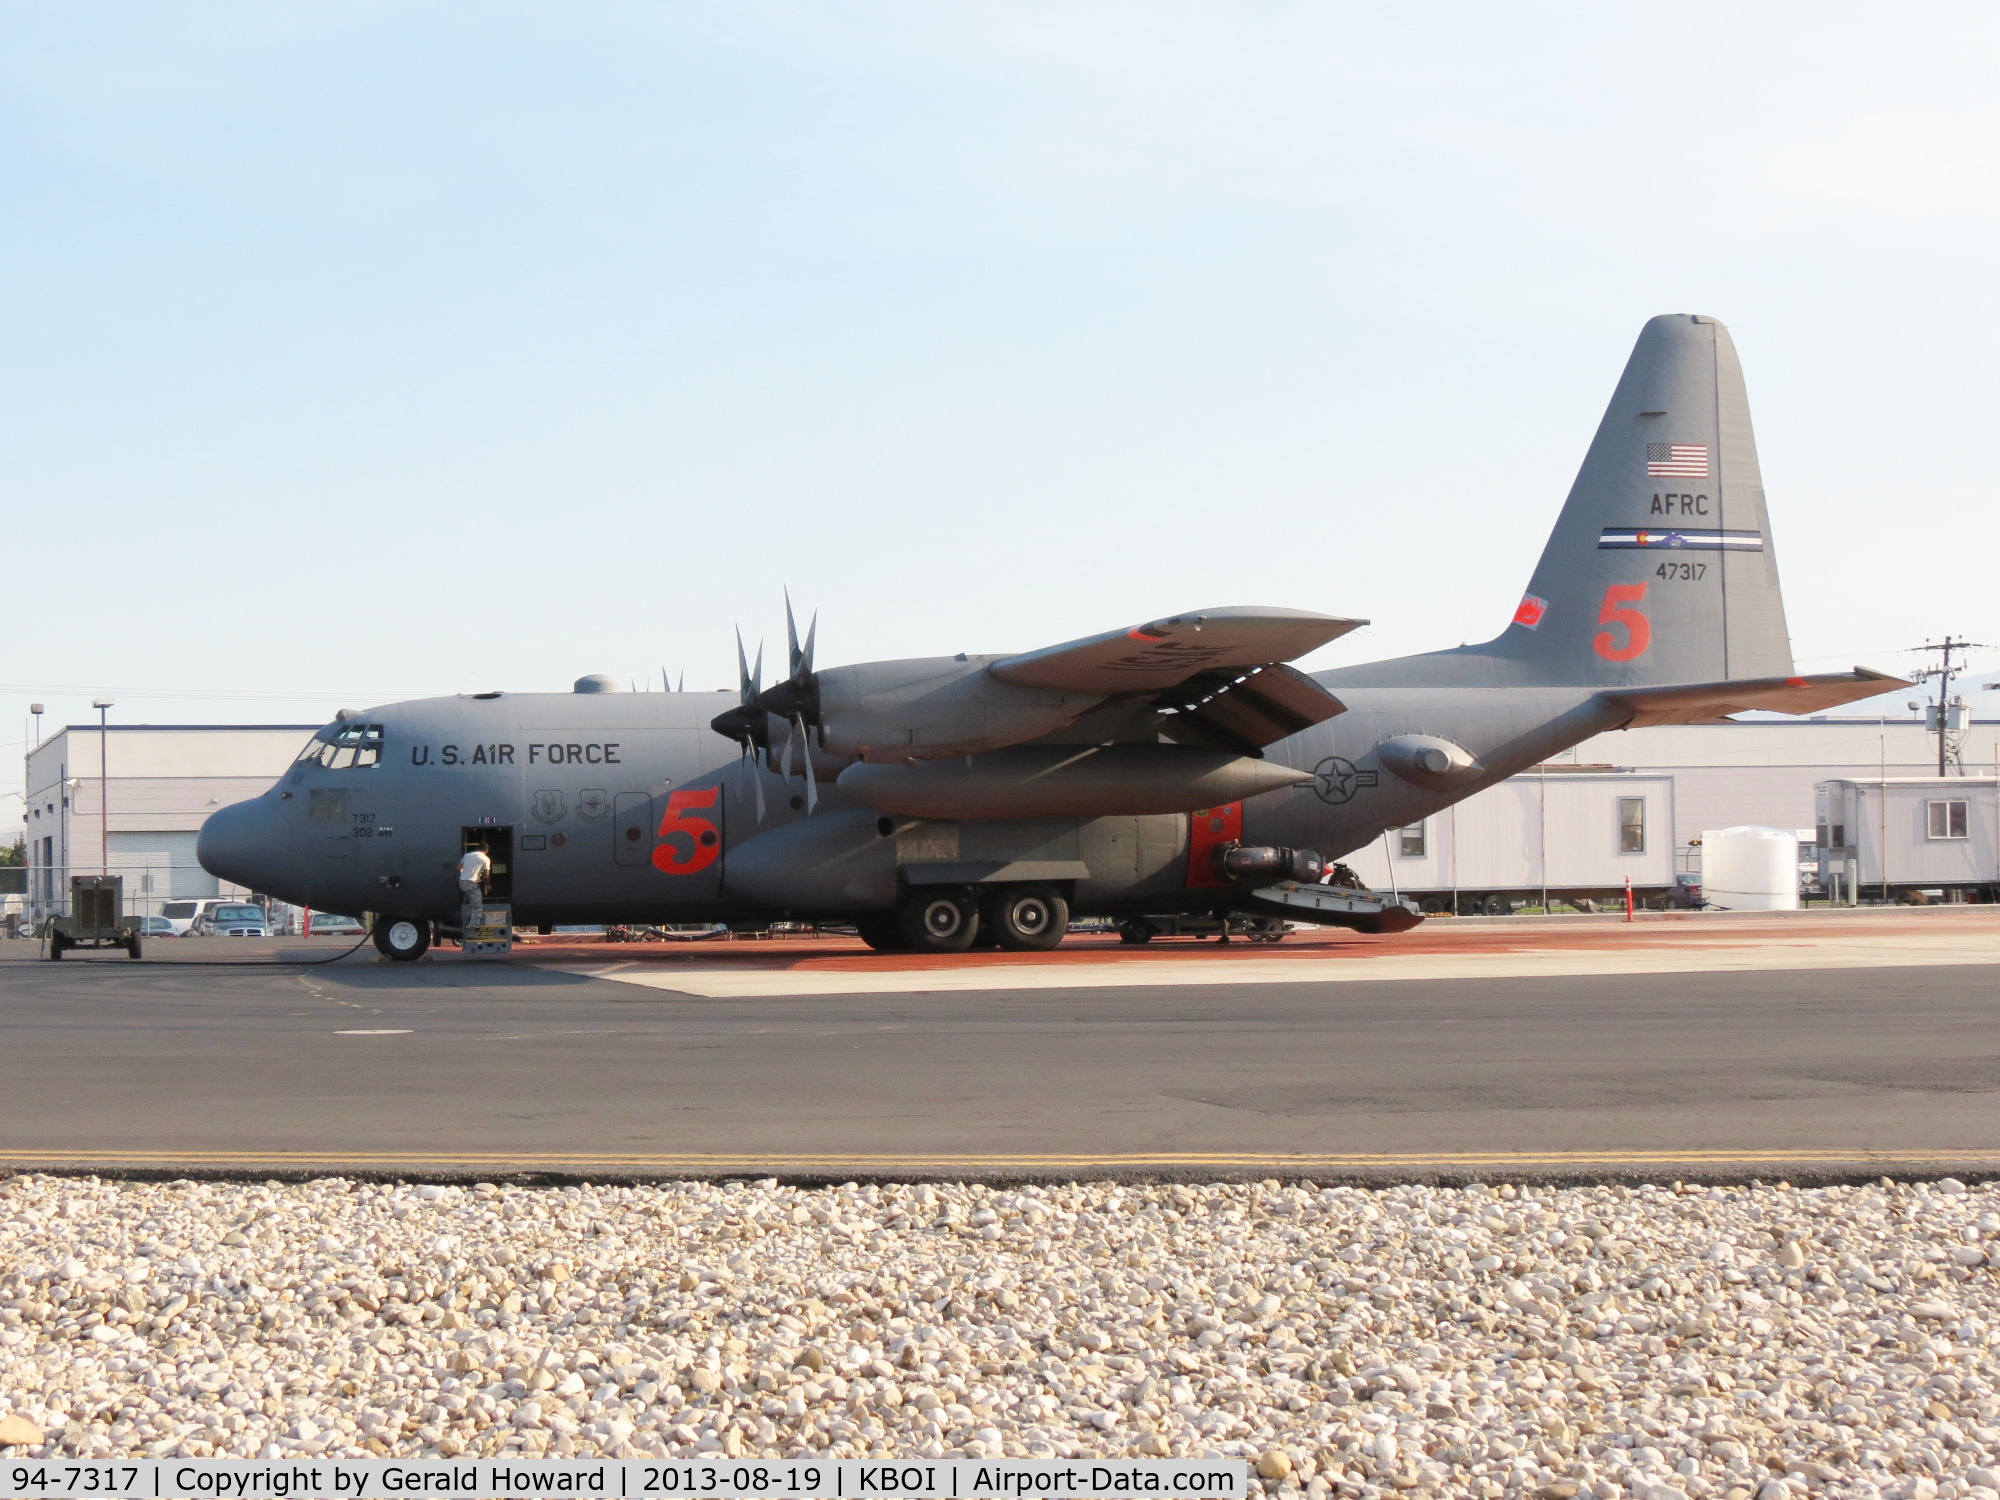 94-7317, 1994 Lockheed C-130H Hercules C/N 382-5391, Parked on NIFC ramp. 302nd Air Wing – Peterson AFB, CO